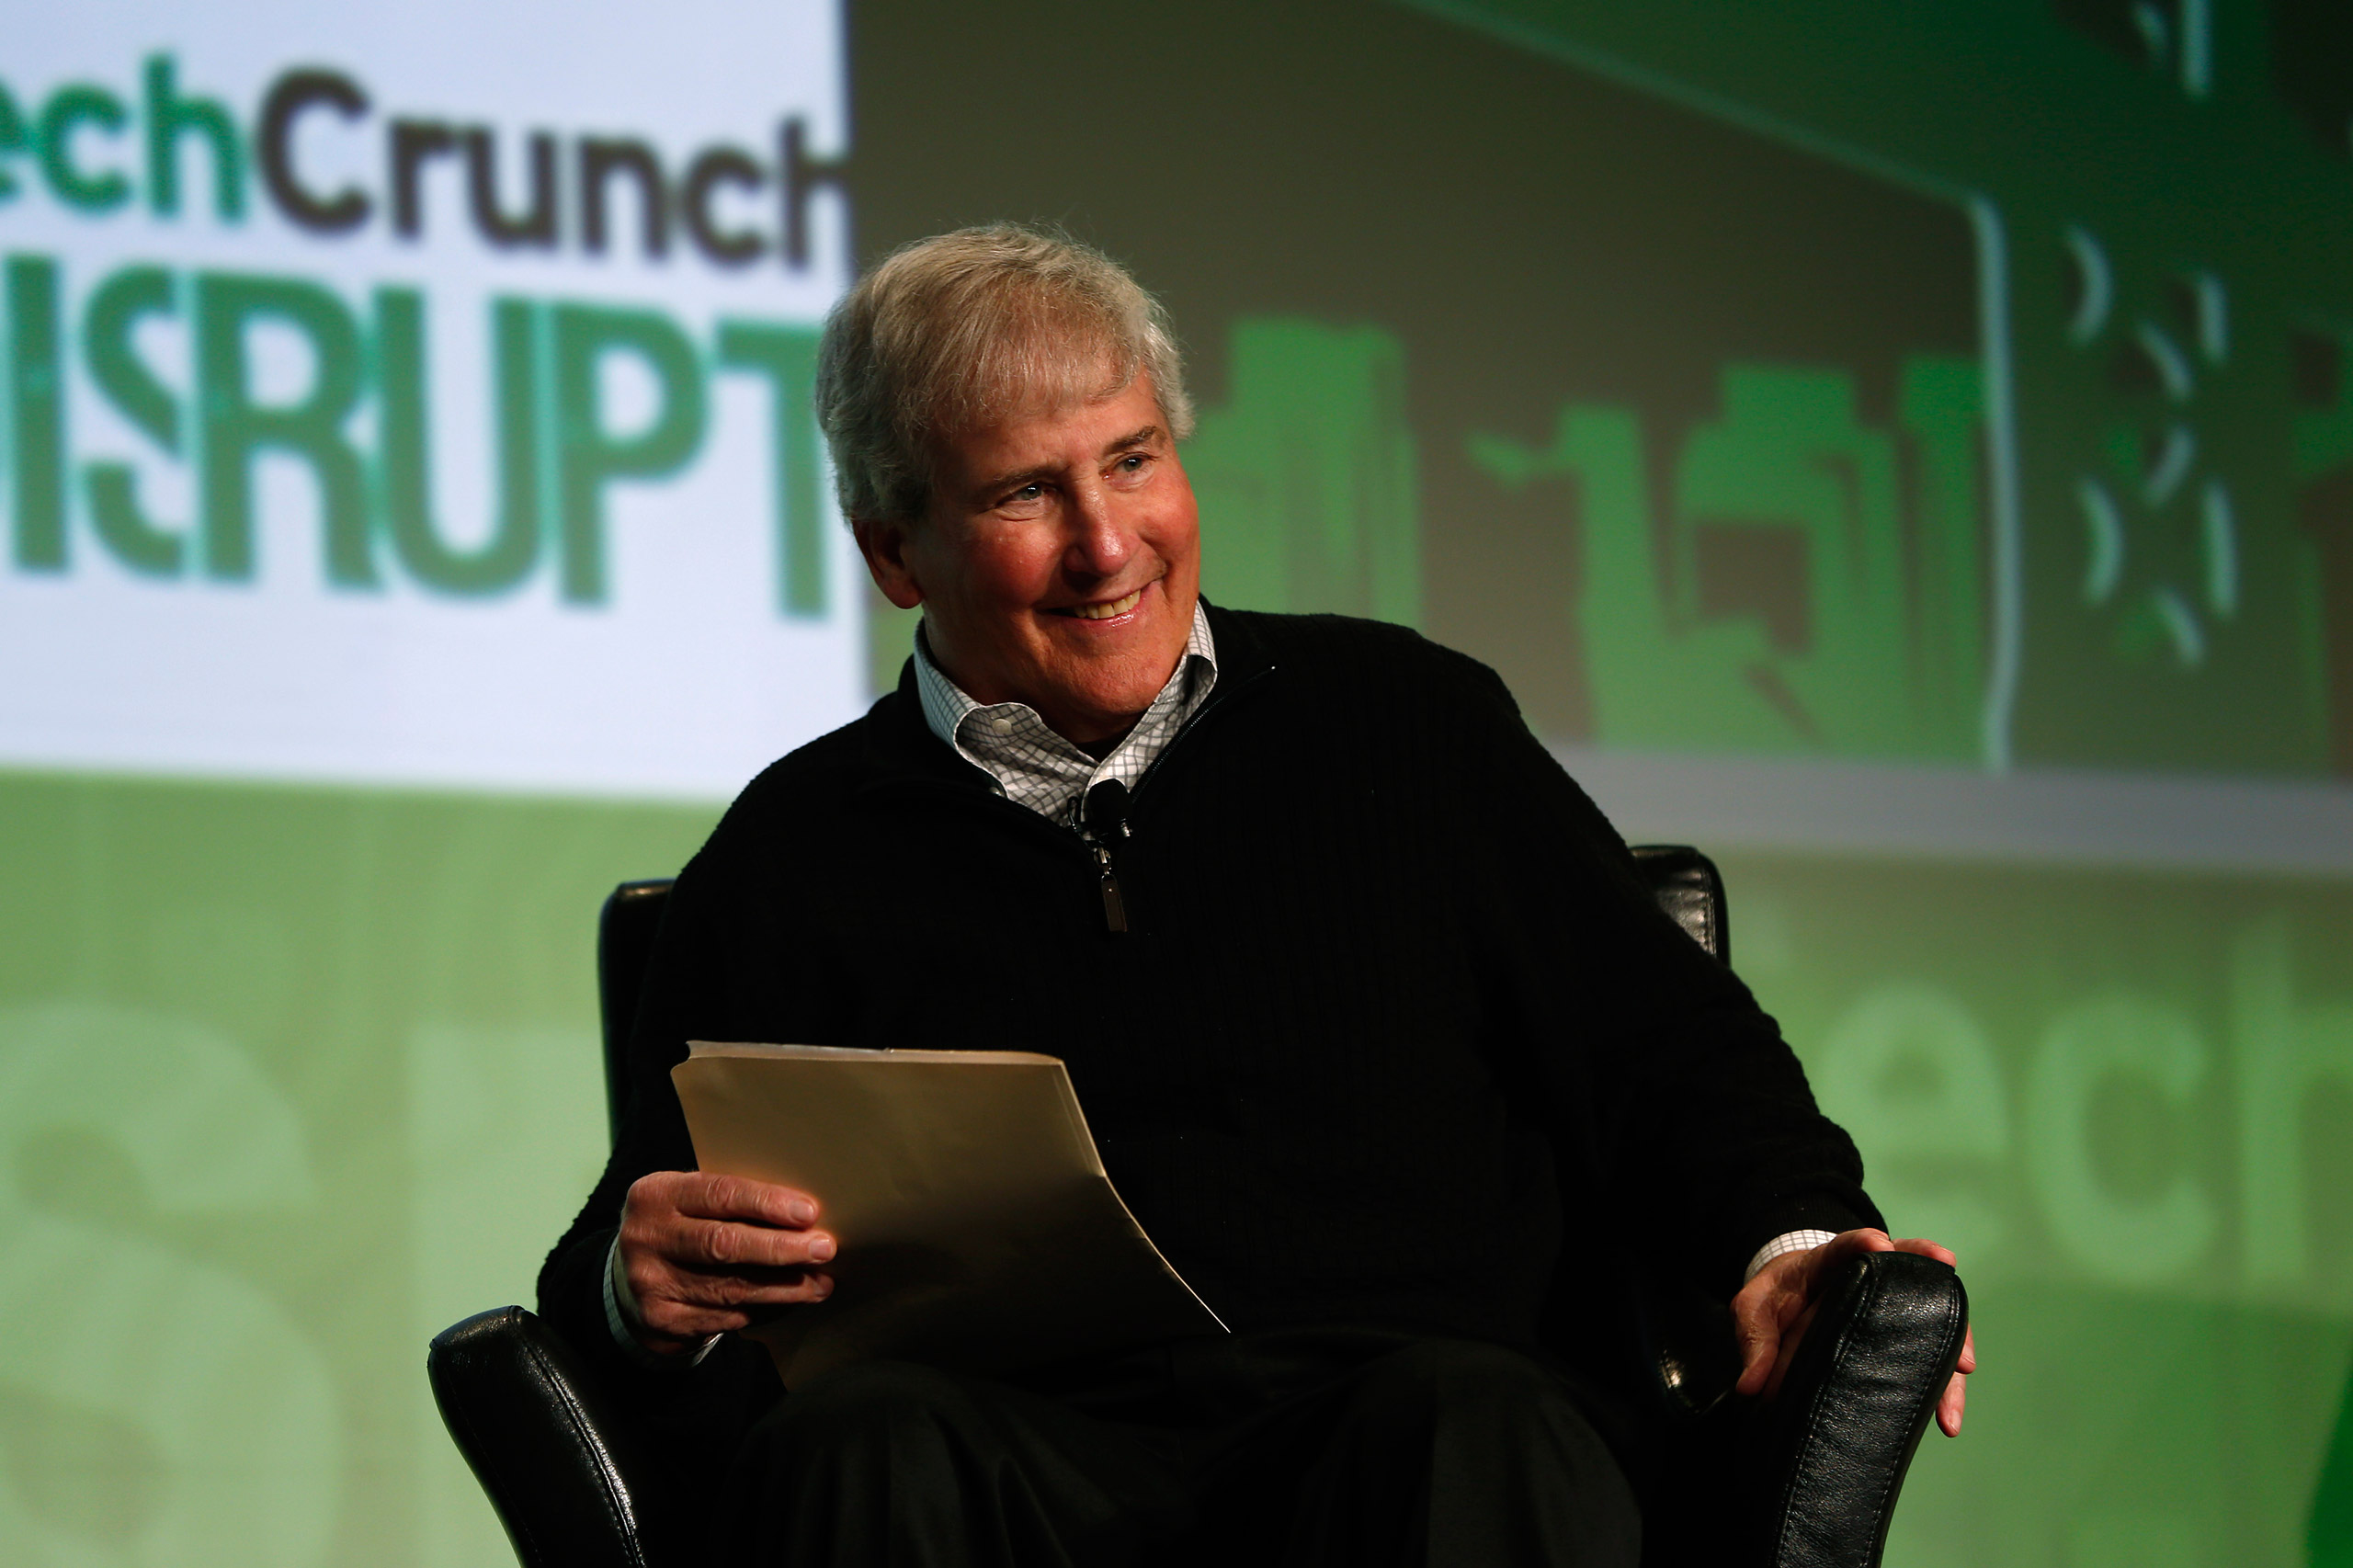 Bill Campbell, chairman of the board and former chief executive of Intuit Inc., moderating a chat with Ben Horowitz of Andreessen Horowitz during day one of TechCrunch Disrupt SF 2012 event at the San Francisco Design Center Concourse in San Francisco on Sept. 10, 2012. (Stephen Lam—Reuters)